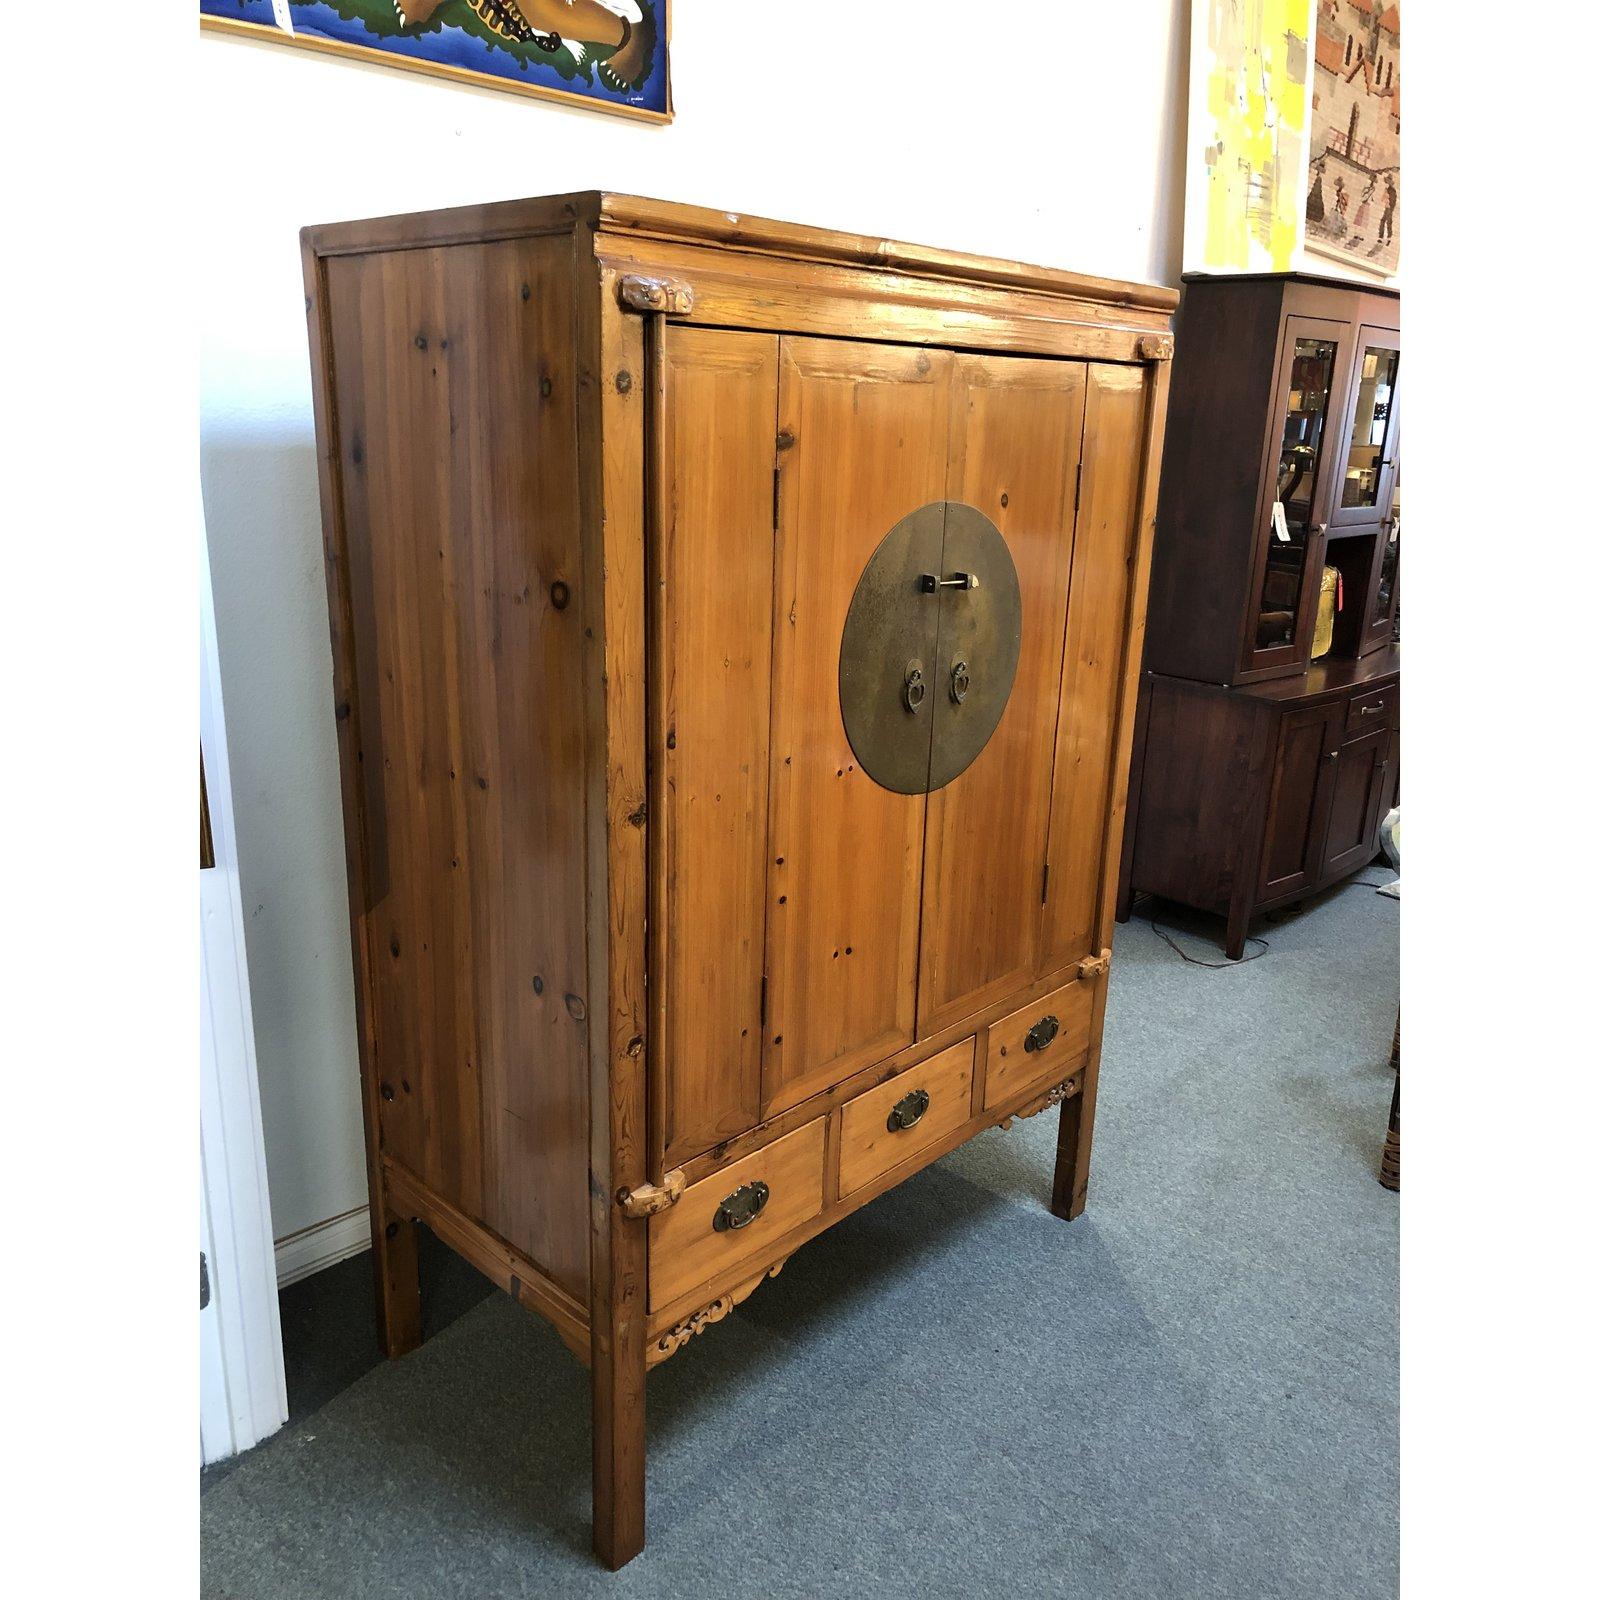 Vintage Chinese armoire. Perfect for any settings.